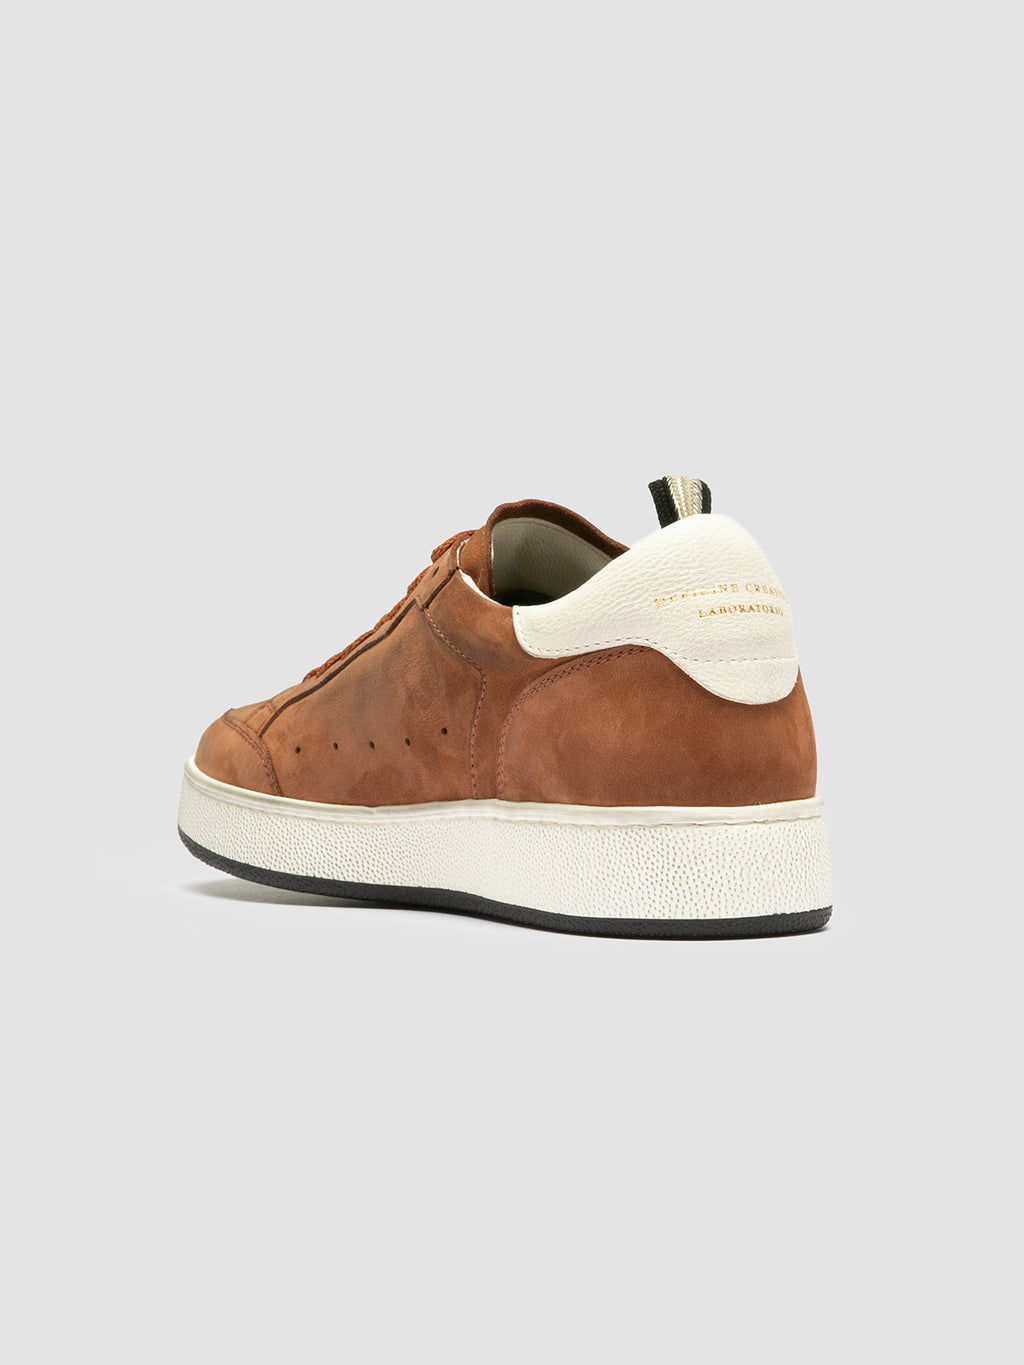 THE ANSWER 102 - Brown Nubuck Low Top Sneakers